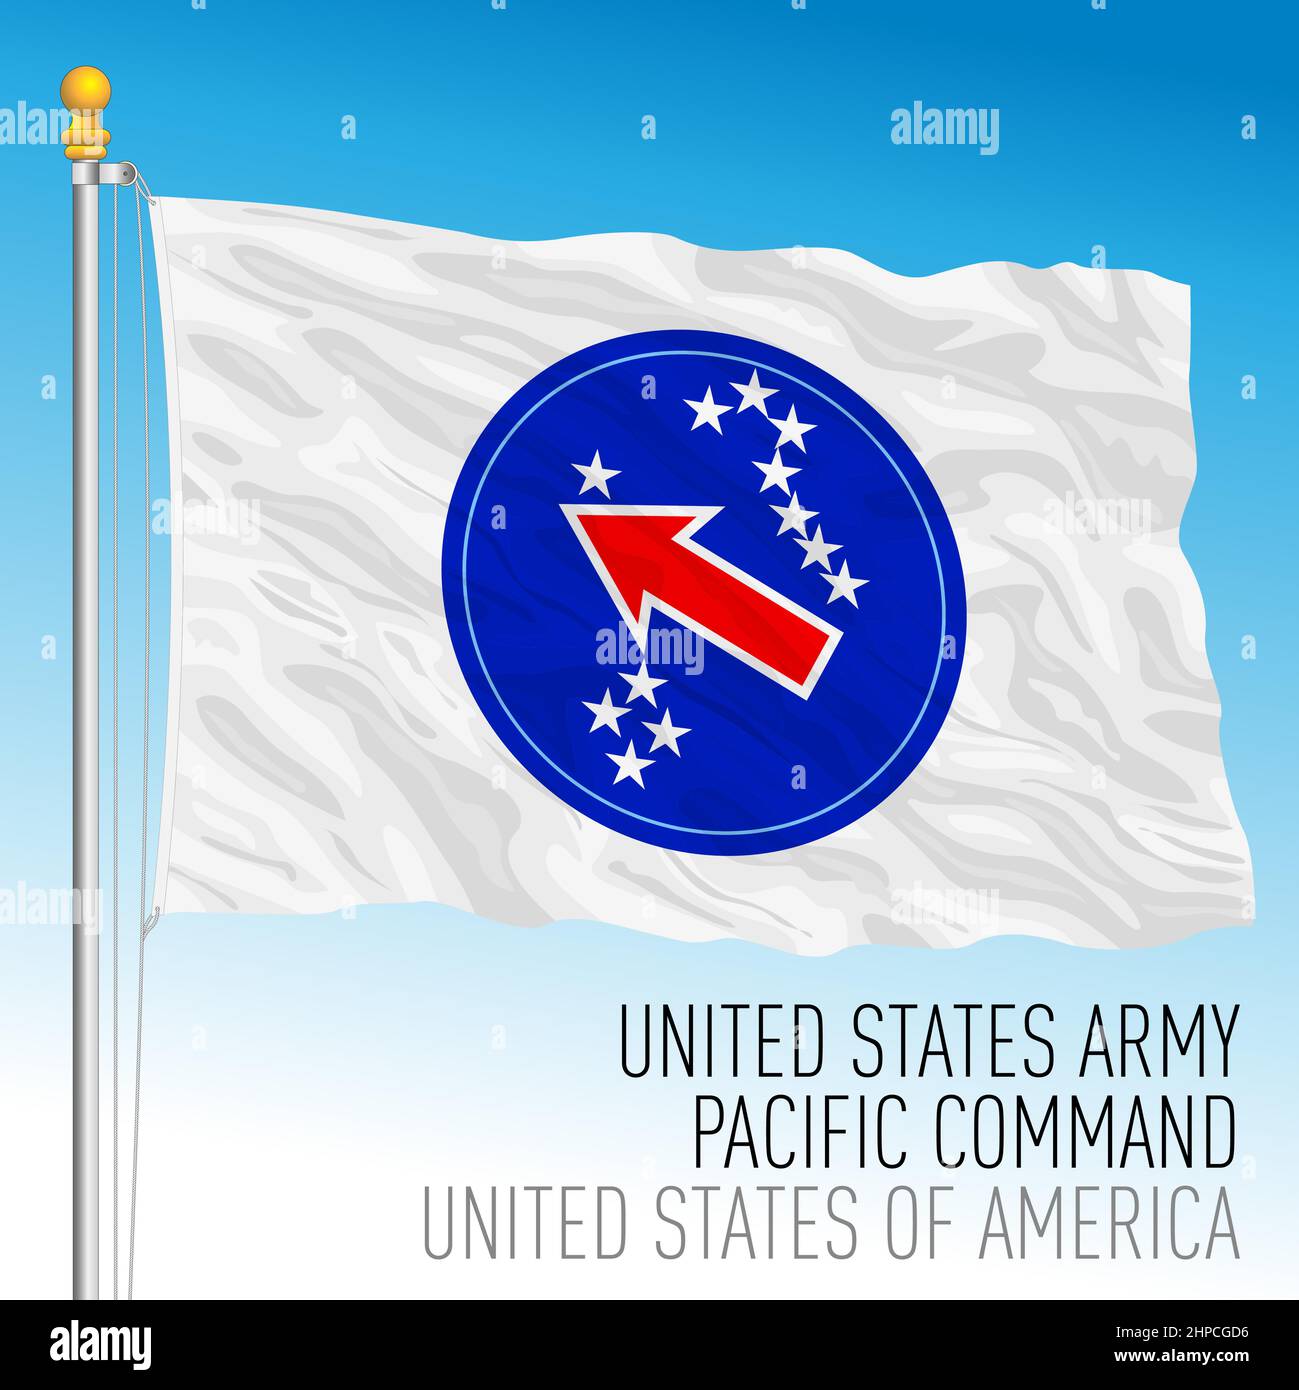 United States Army Pacific Command flag, USA, vector illustration Stock Vector